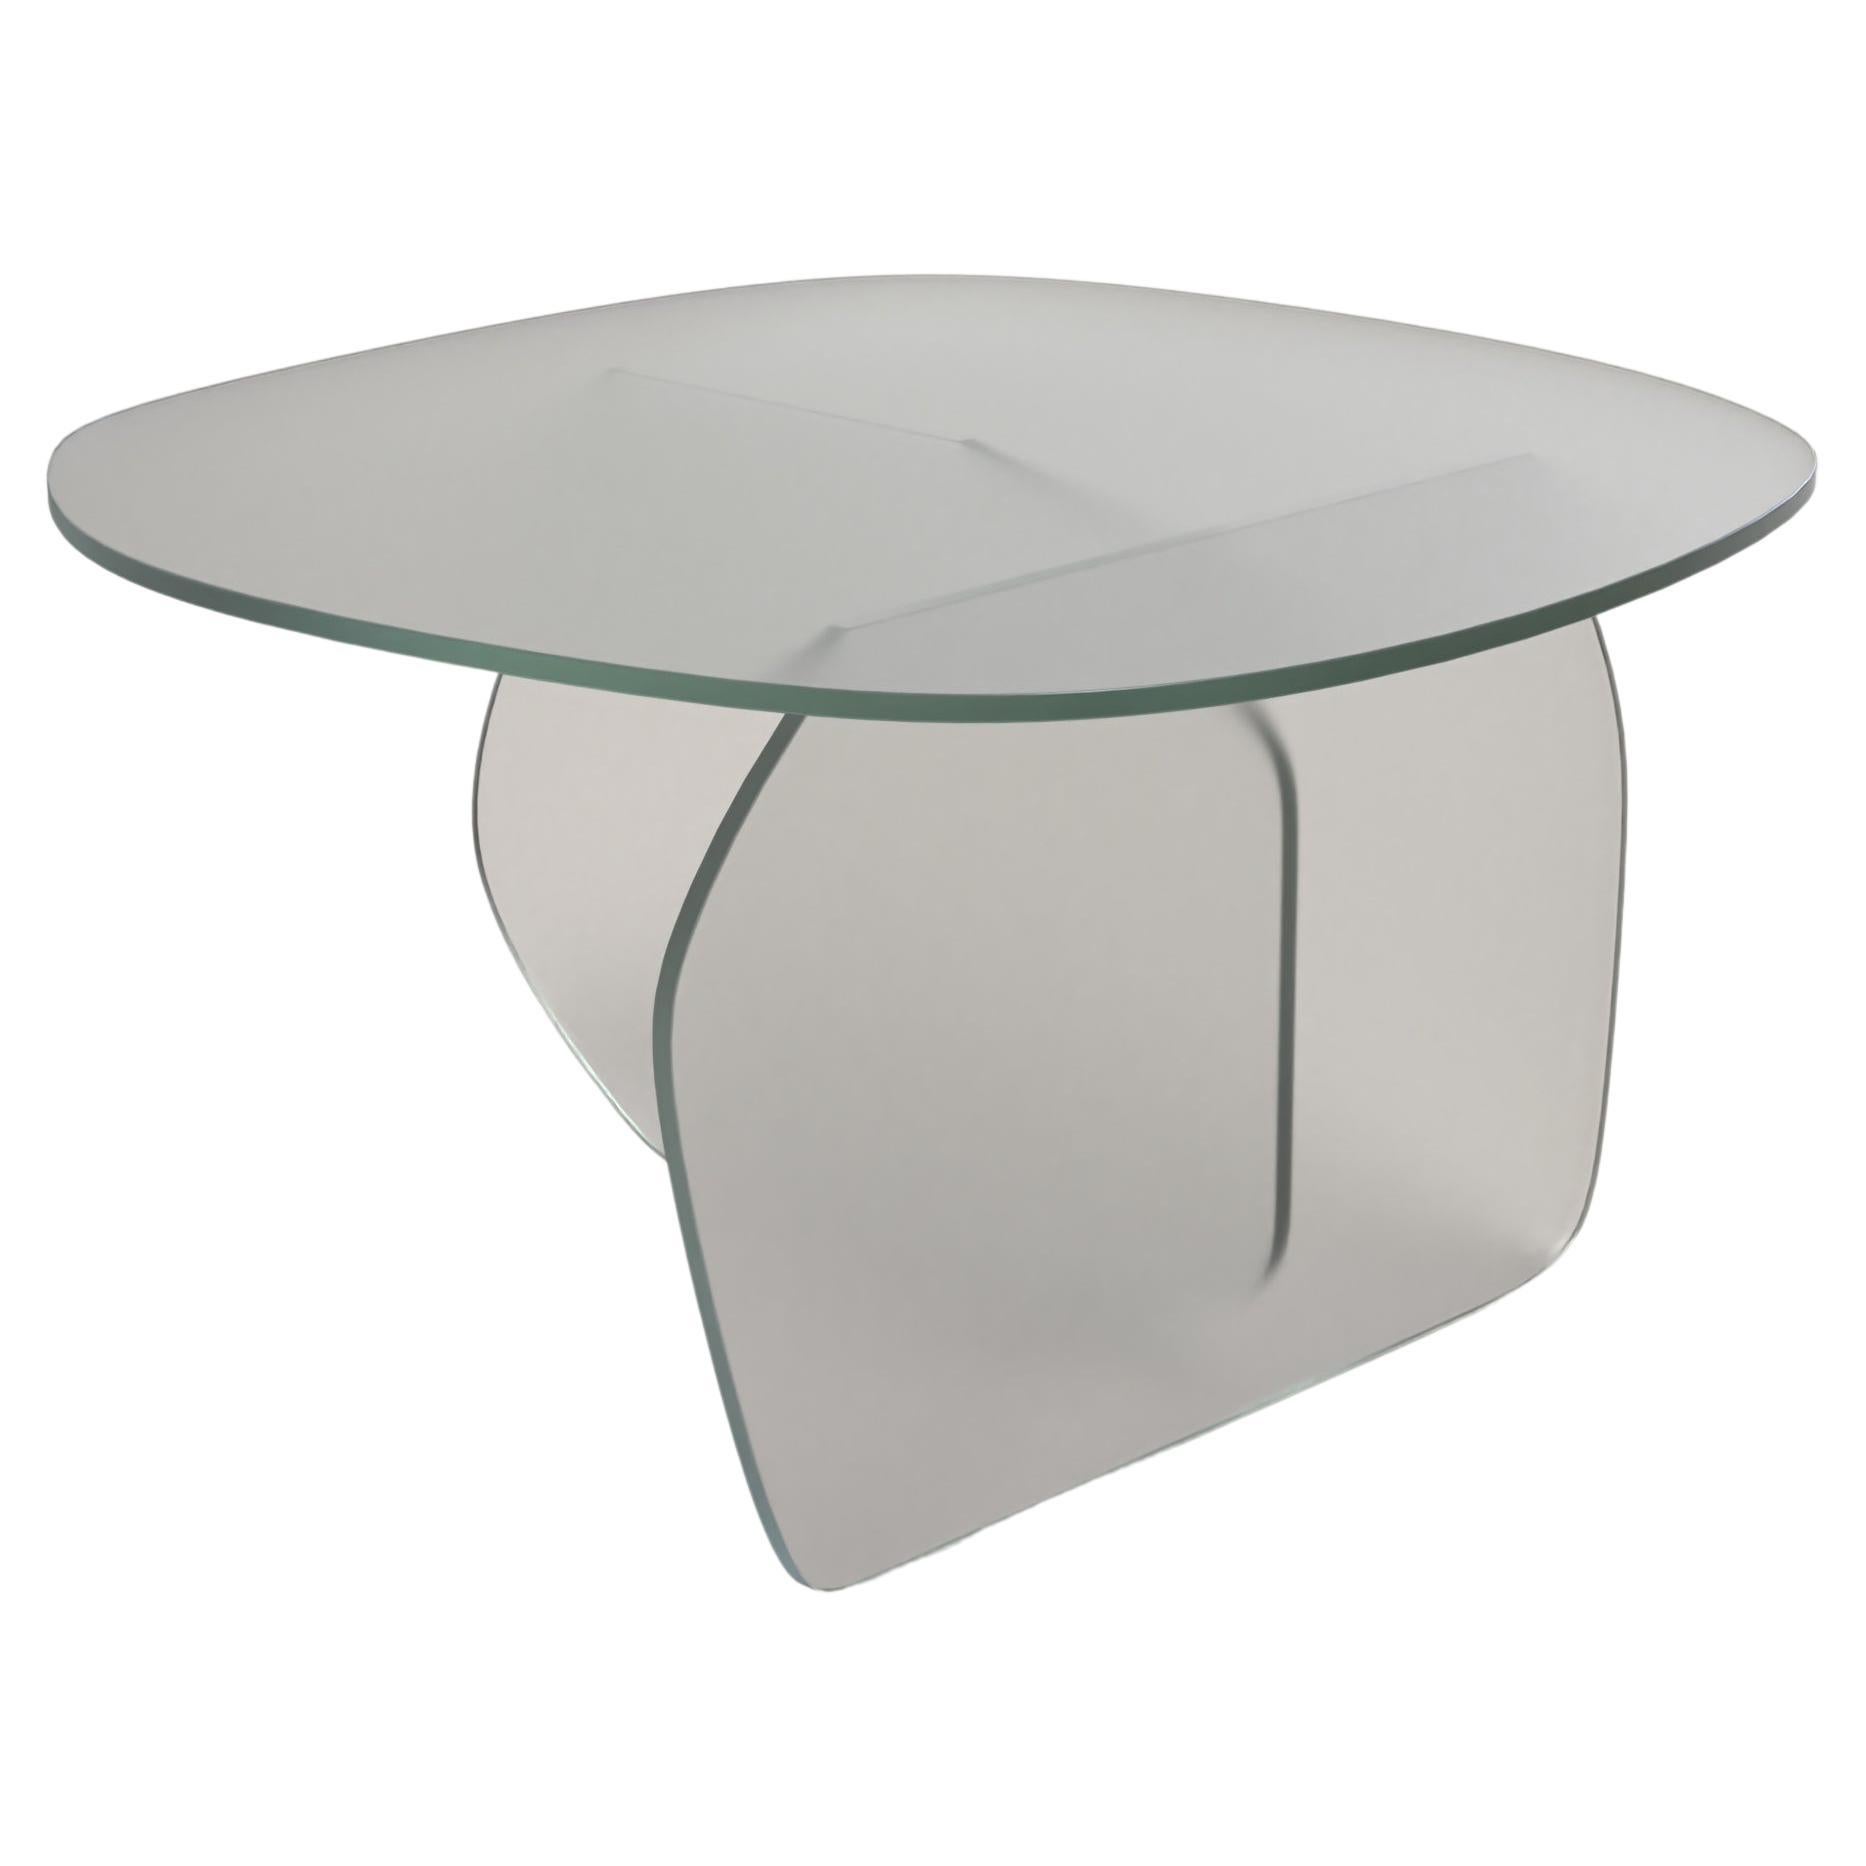 Contemporary Limited Edition Clear Glass Table, Panorama V2 by Edizione Limitata